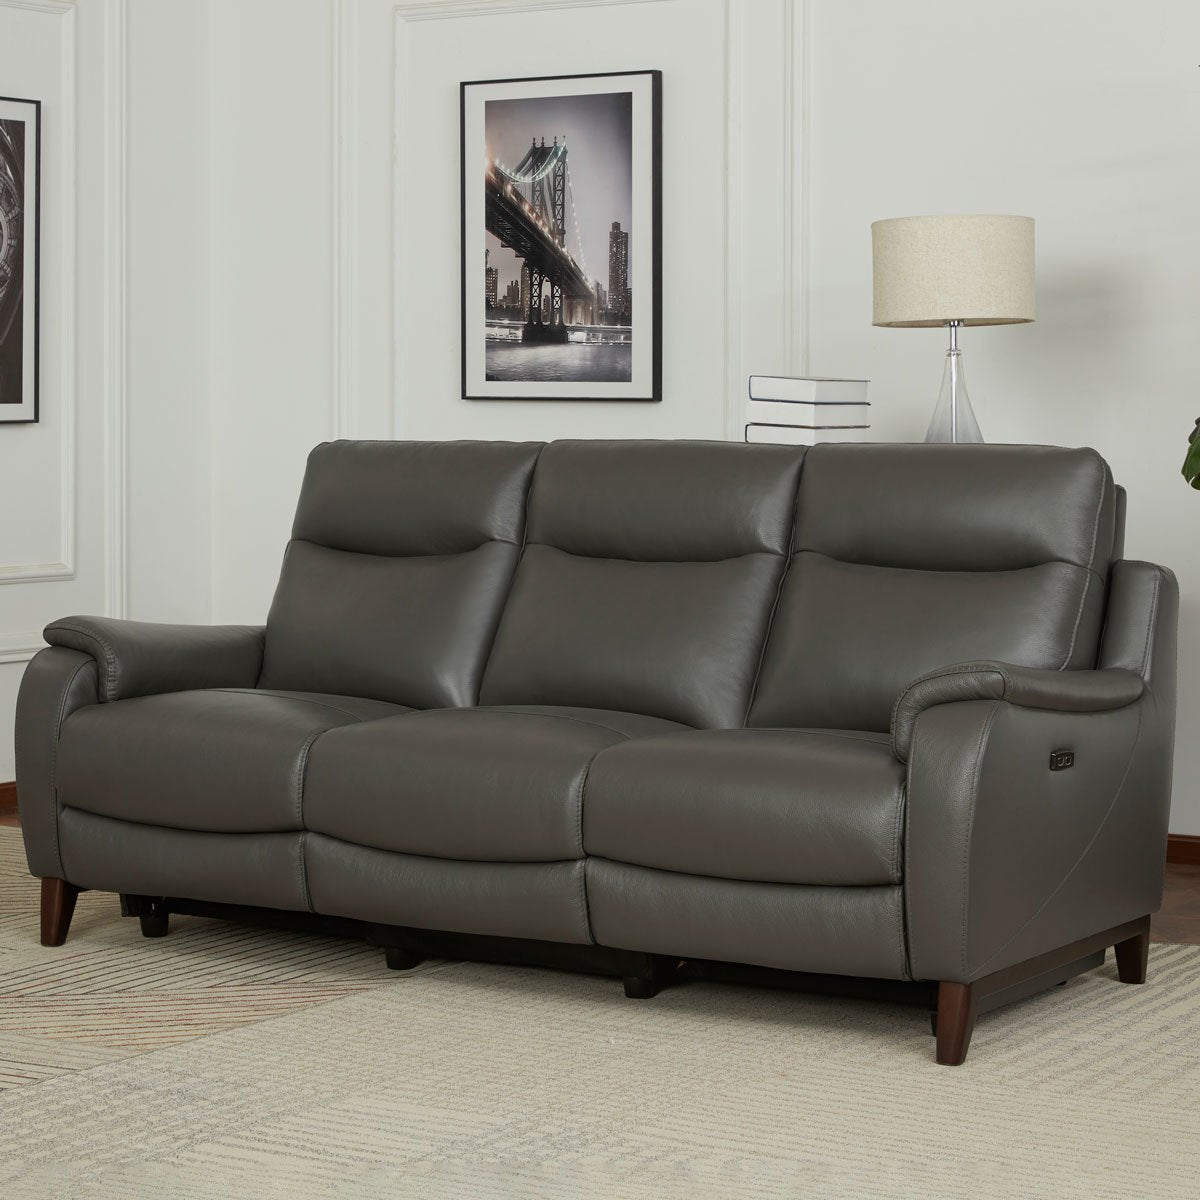 Gilman Creek Barrett 3 Seater Grey Leather Power Reclining Sofa with Power Headrests - Signature Retail Stores